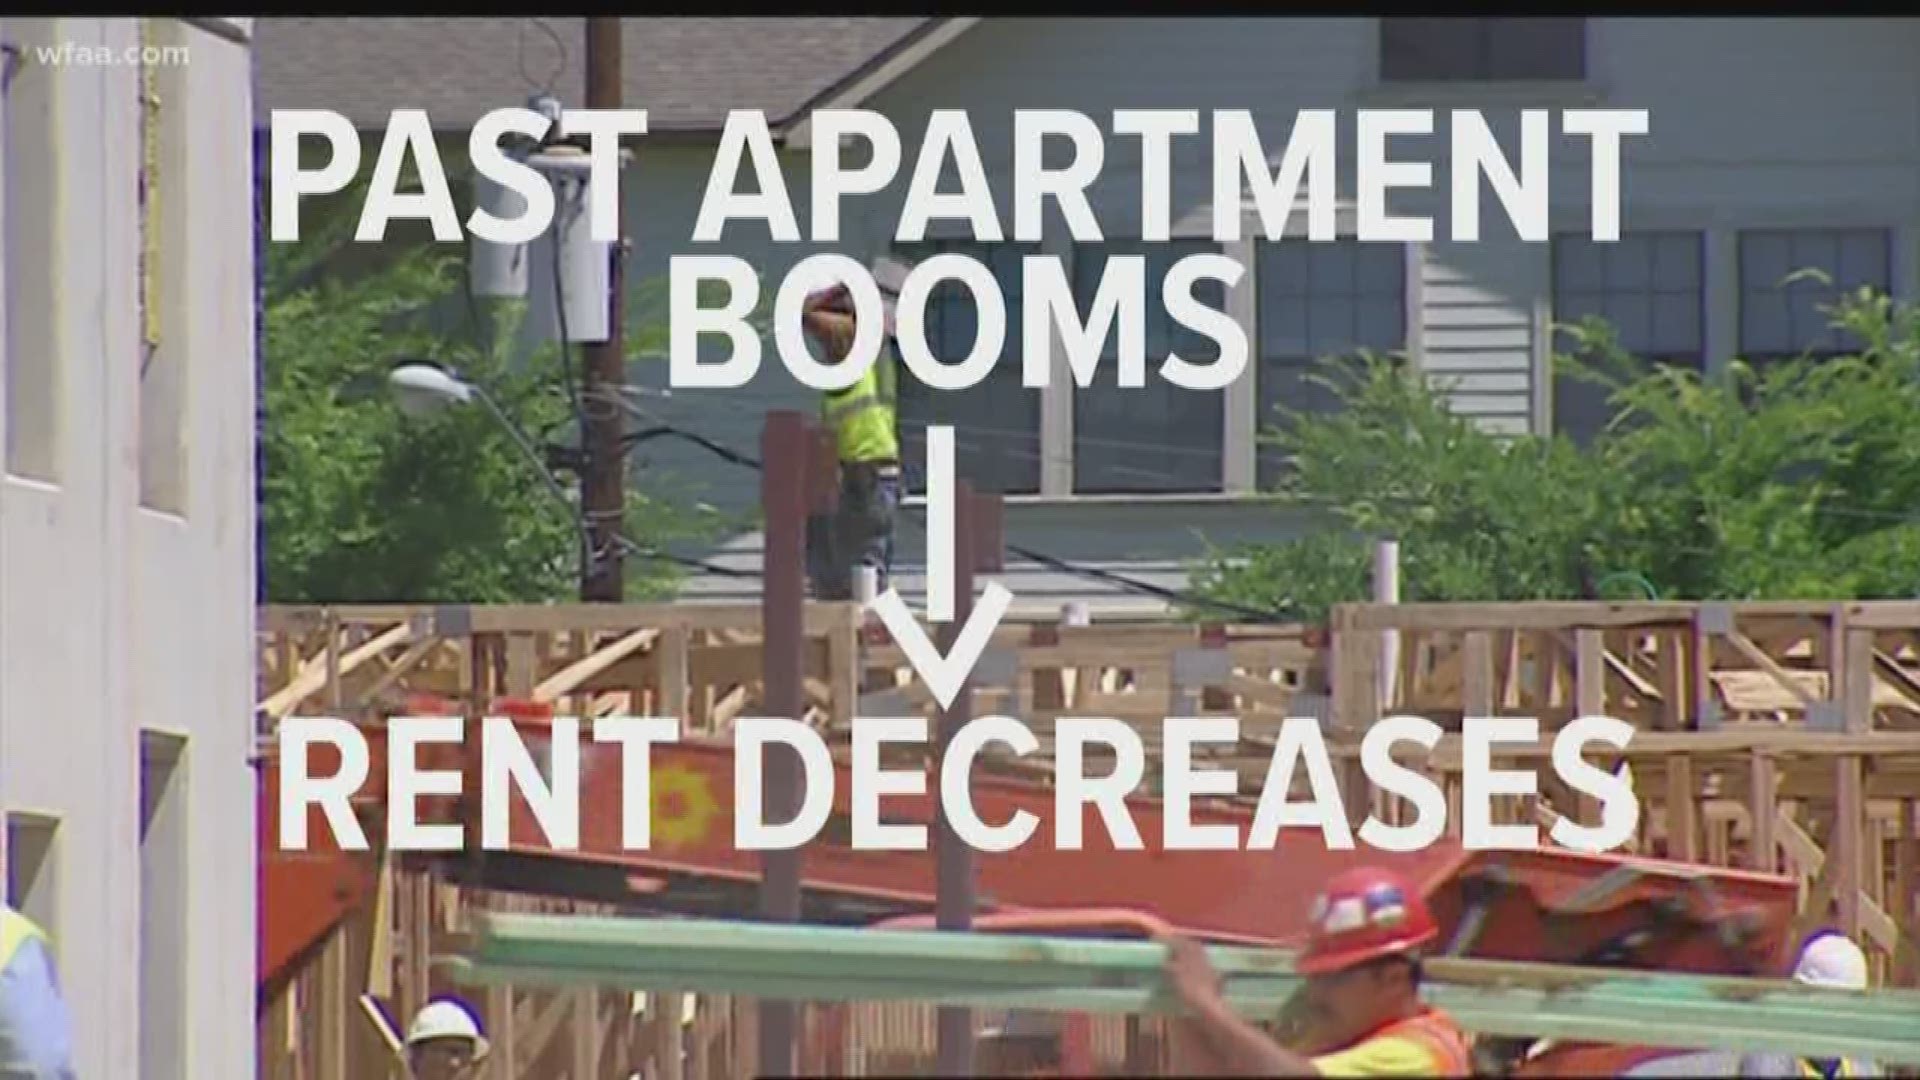 Will an apartment boom in the city of Dallas lead to lower rent?